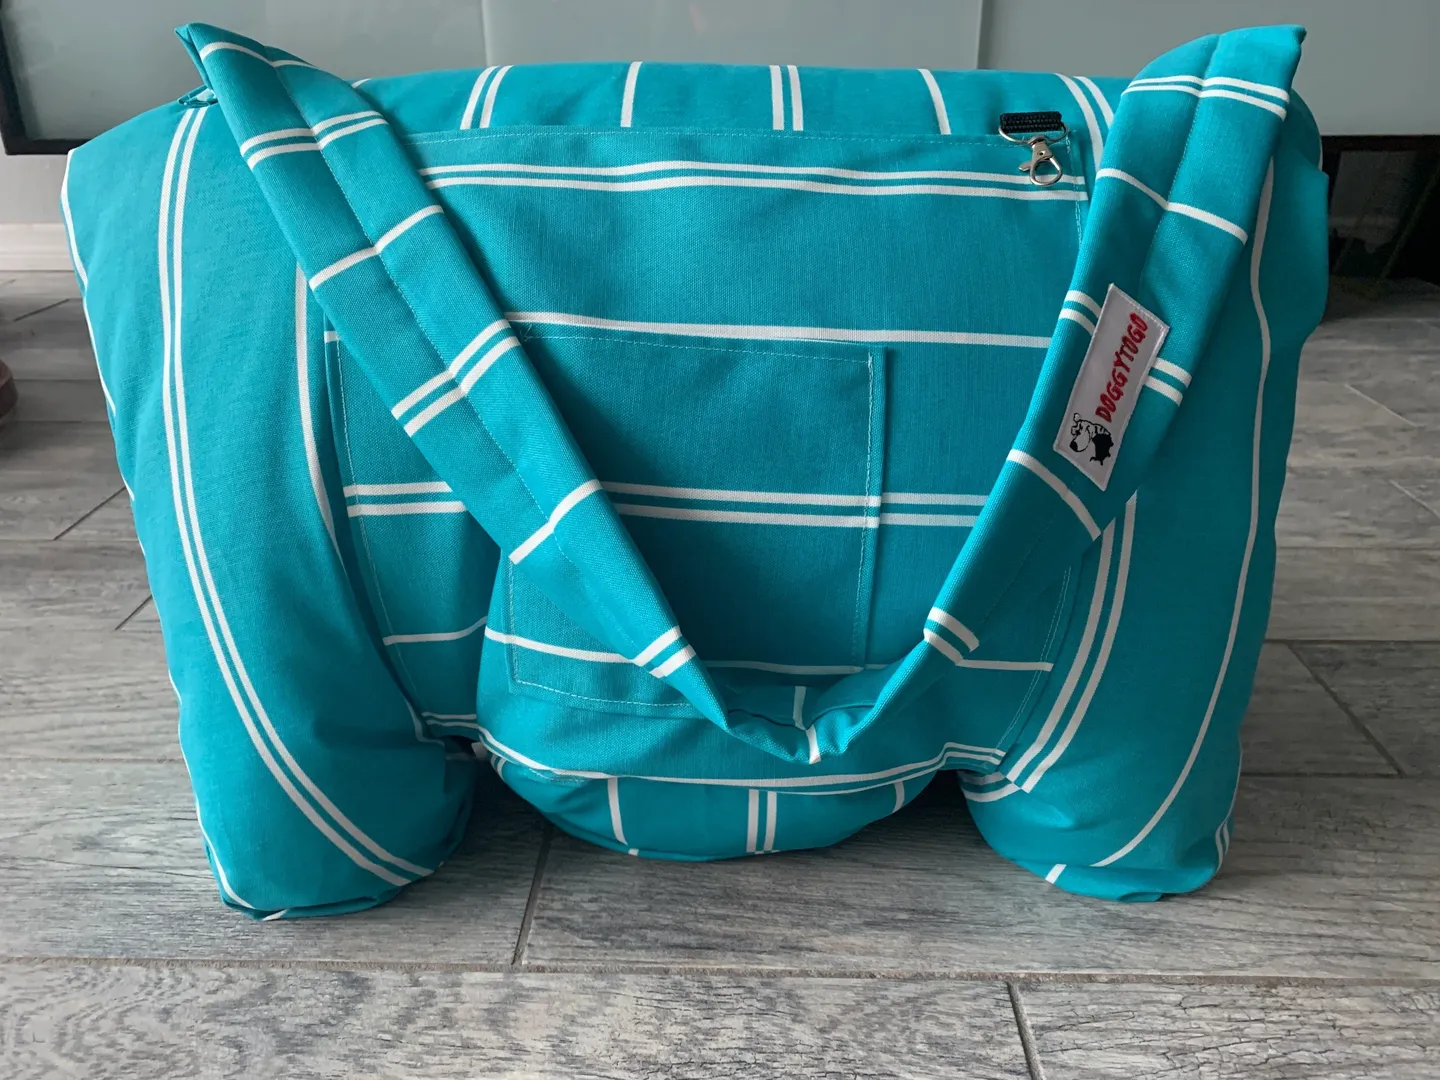 A blue dog bed bag with white stripes